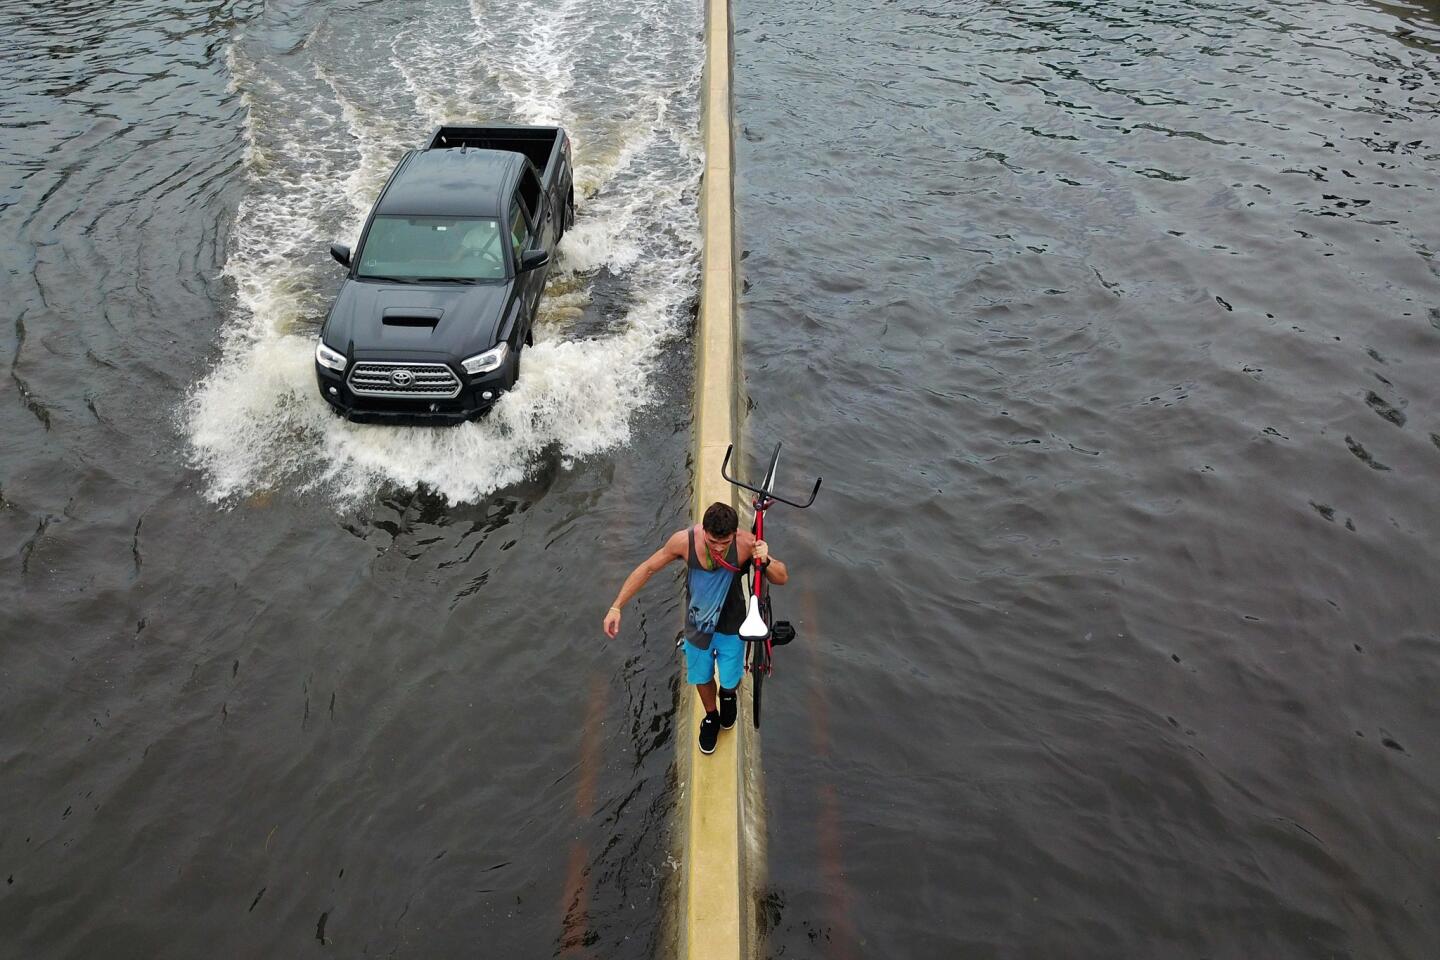 A man walks on a highway divider while carrying his bicycle in the aftermath of Hurricane Maria in San Juan, Puerto Rico.